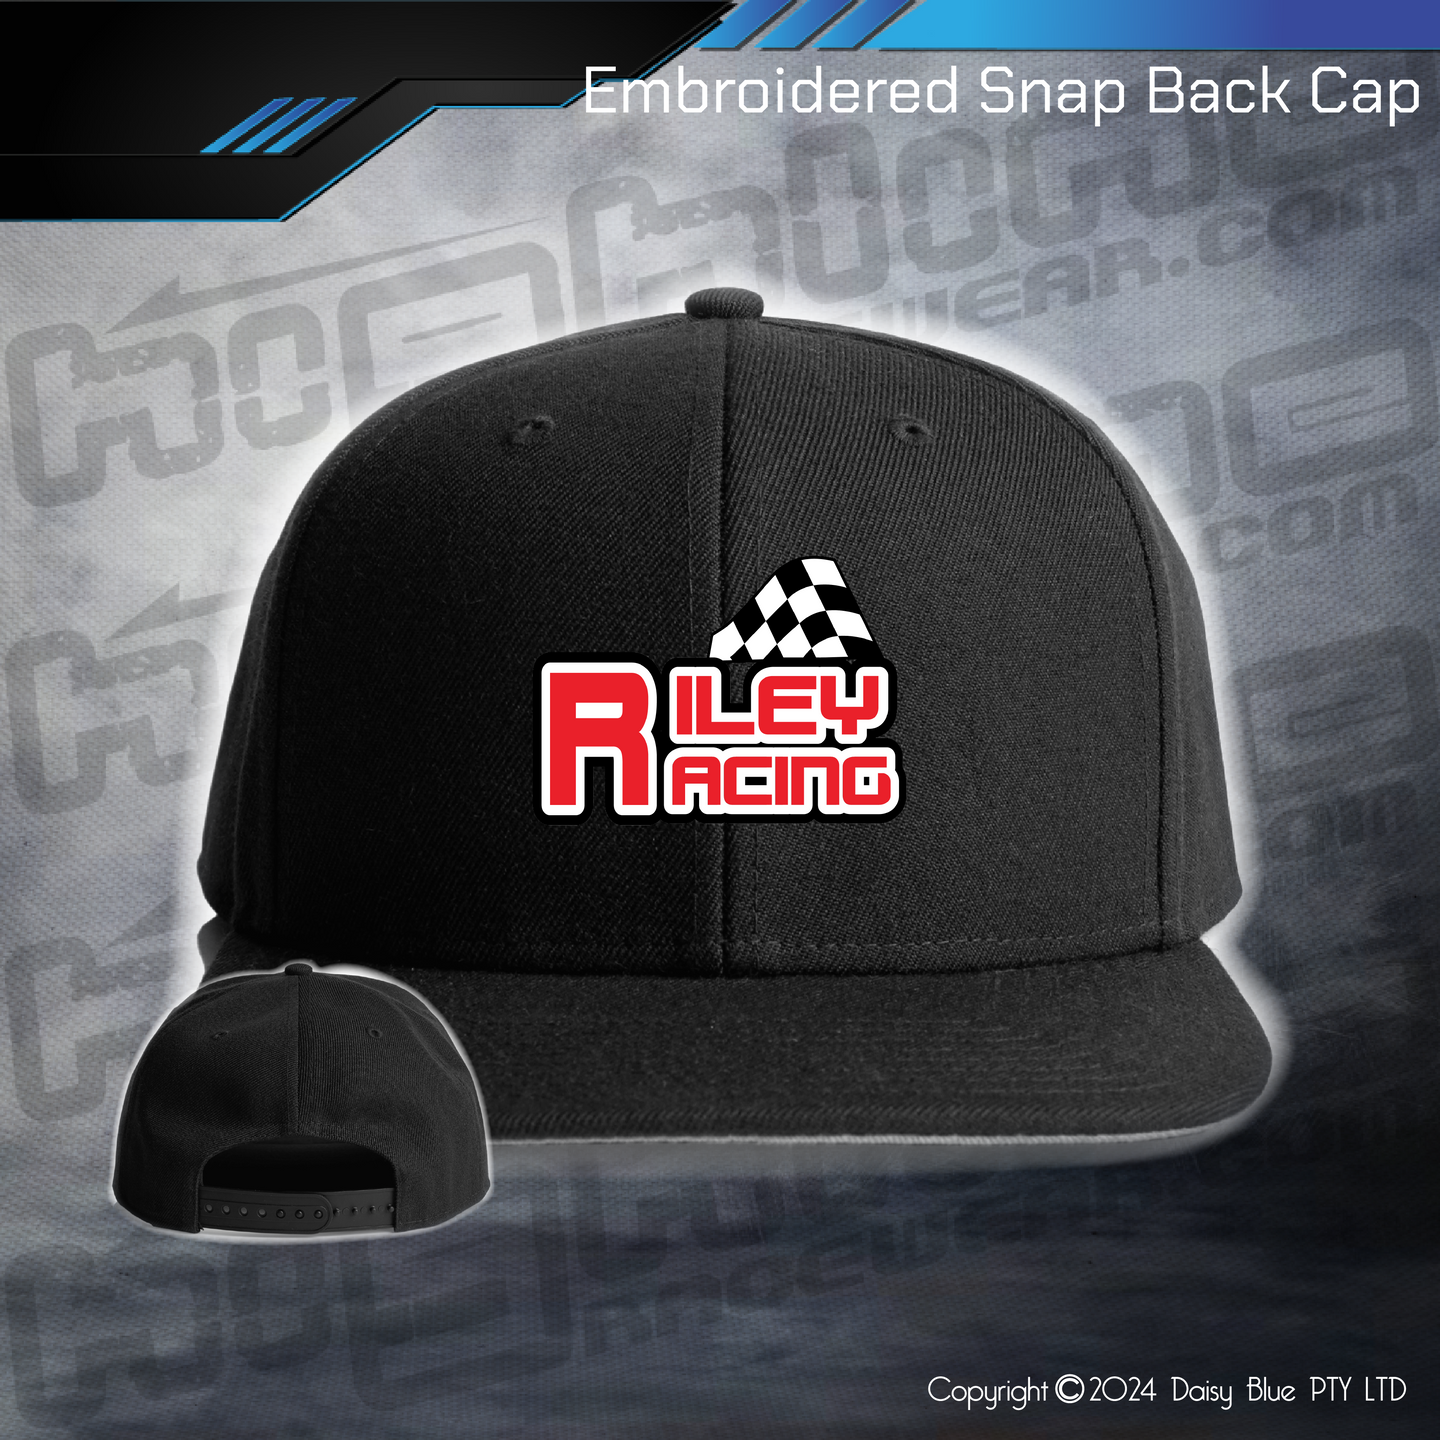 Embroidered Snap Back CAP - Riley Racing